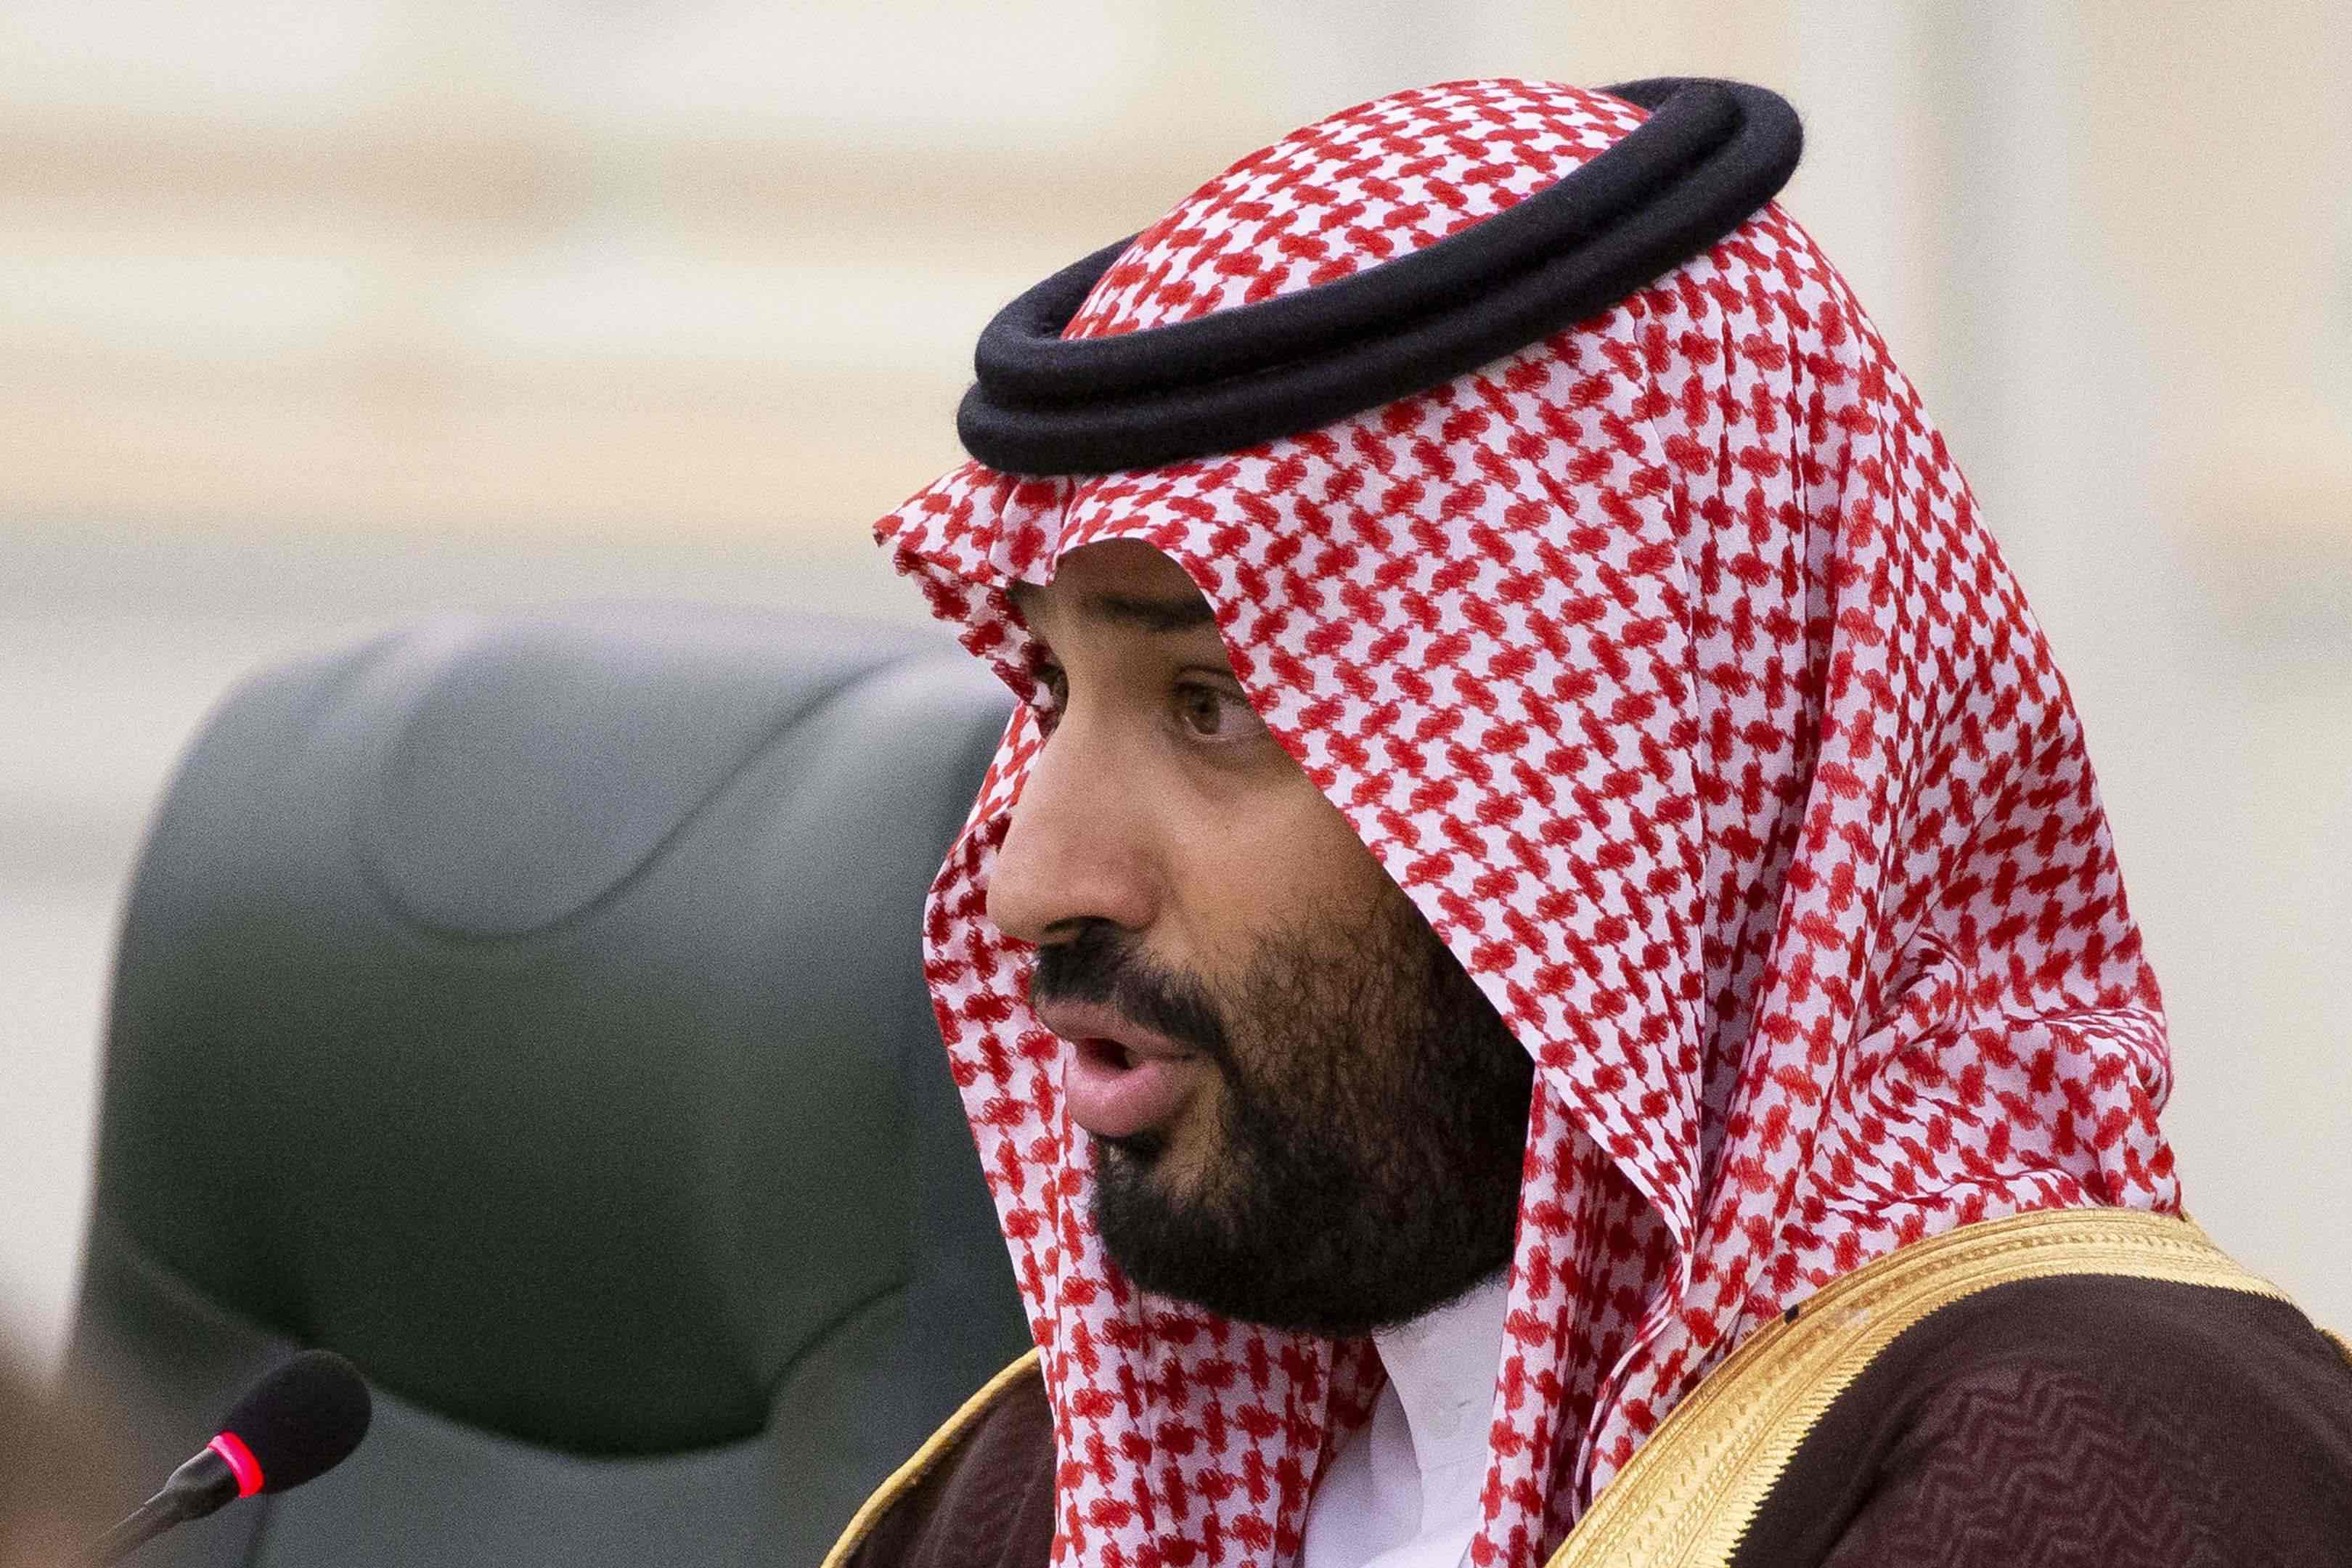 The Saudi crown prince's visit reflects "agreement between Abu Dhabi and Riyadh... in addressing regional challenges"